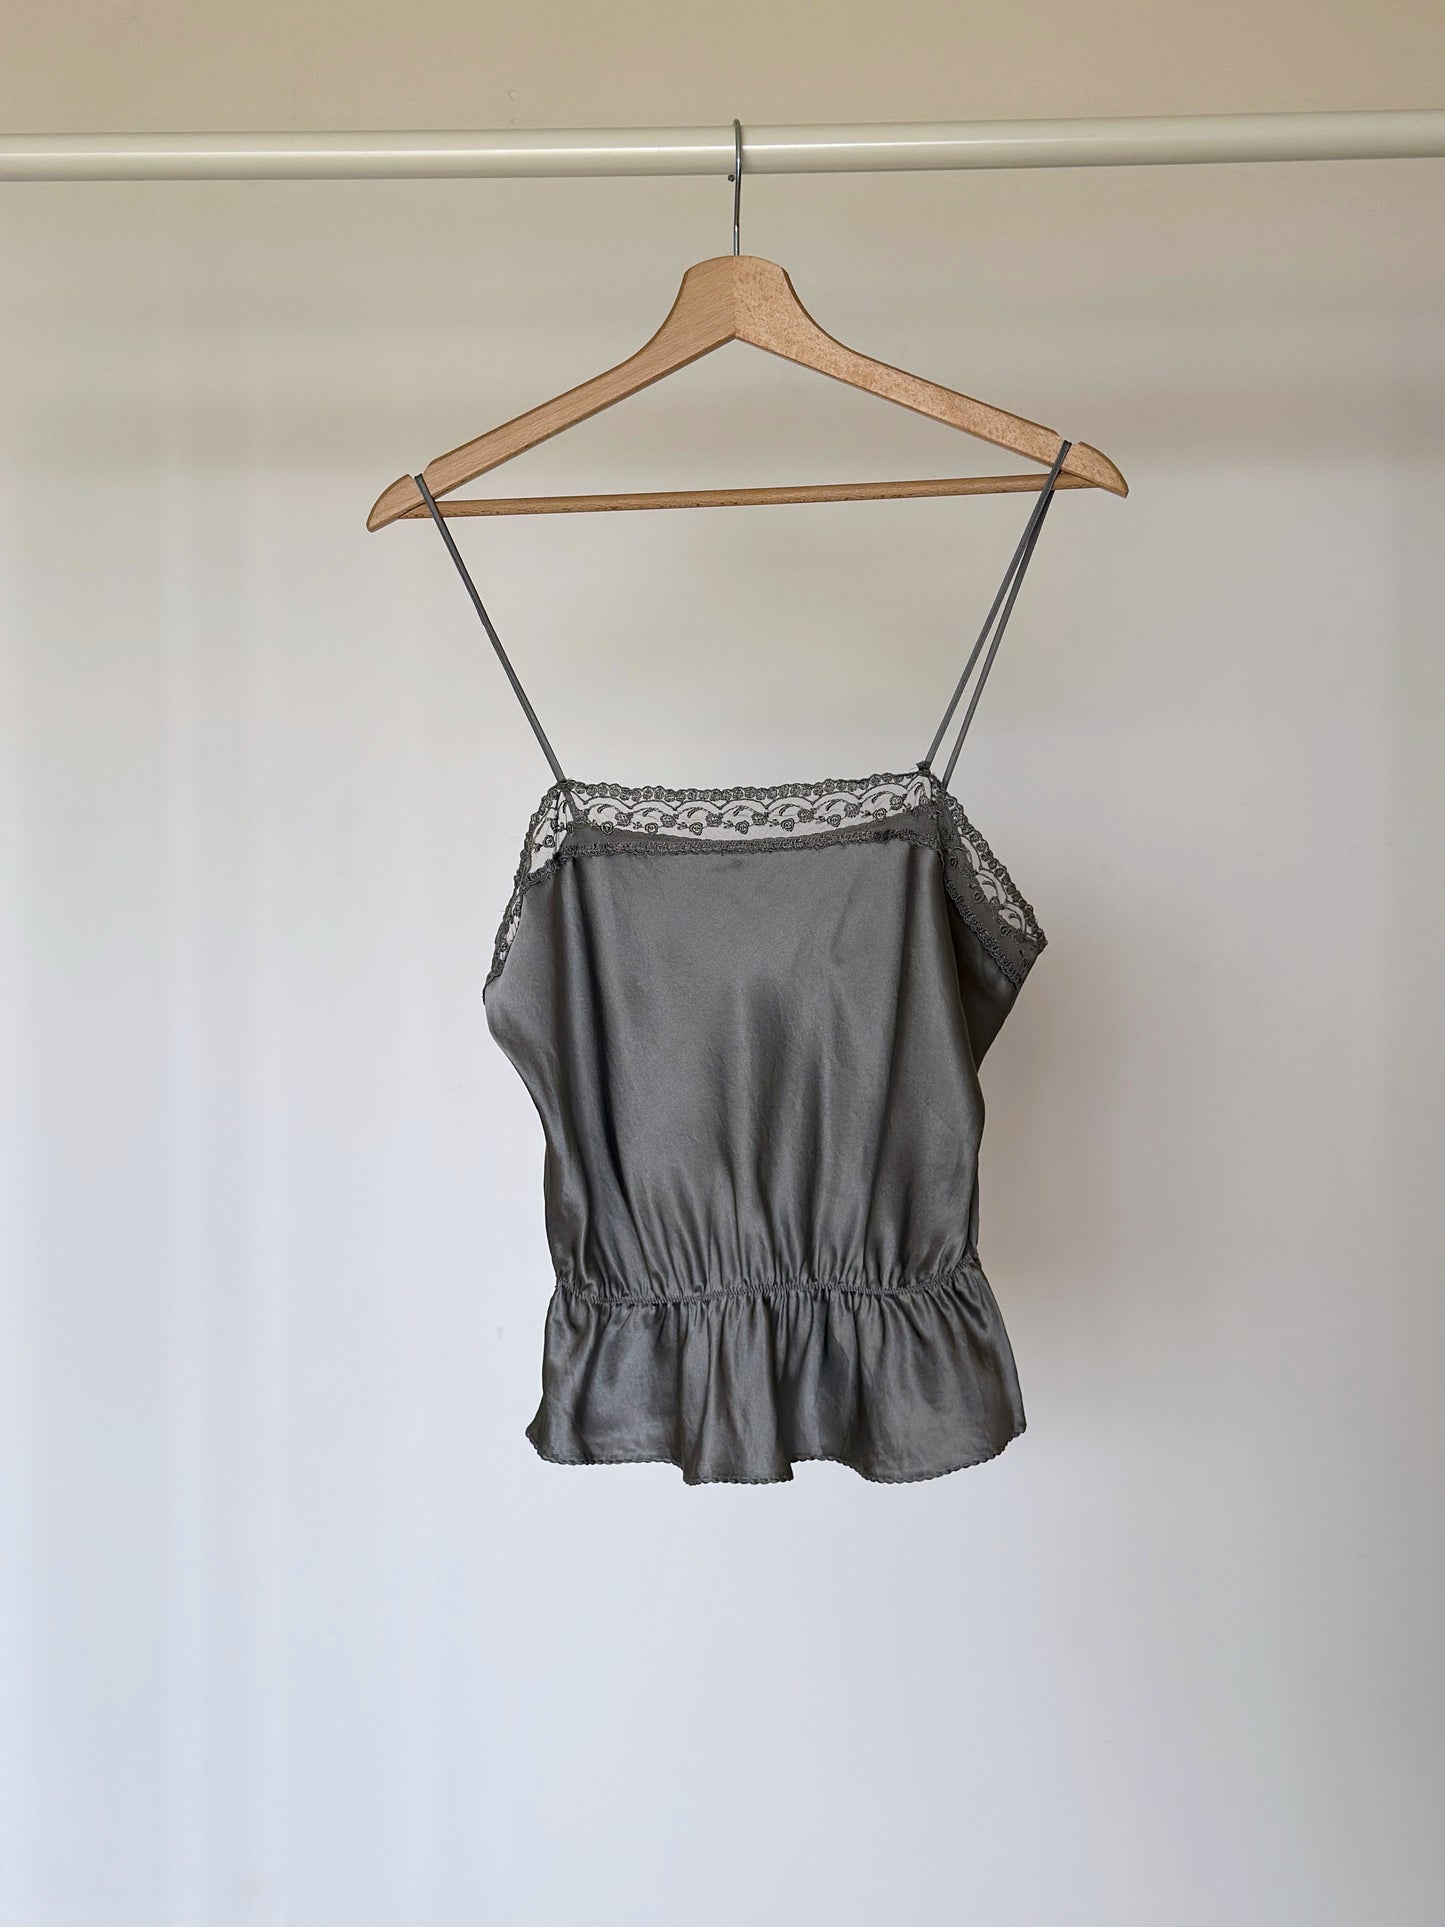 Vintage silk top with lace